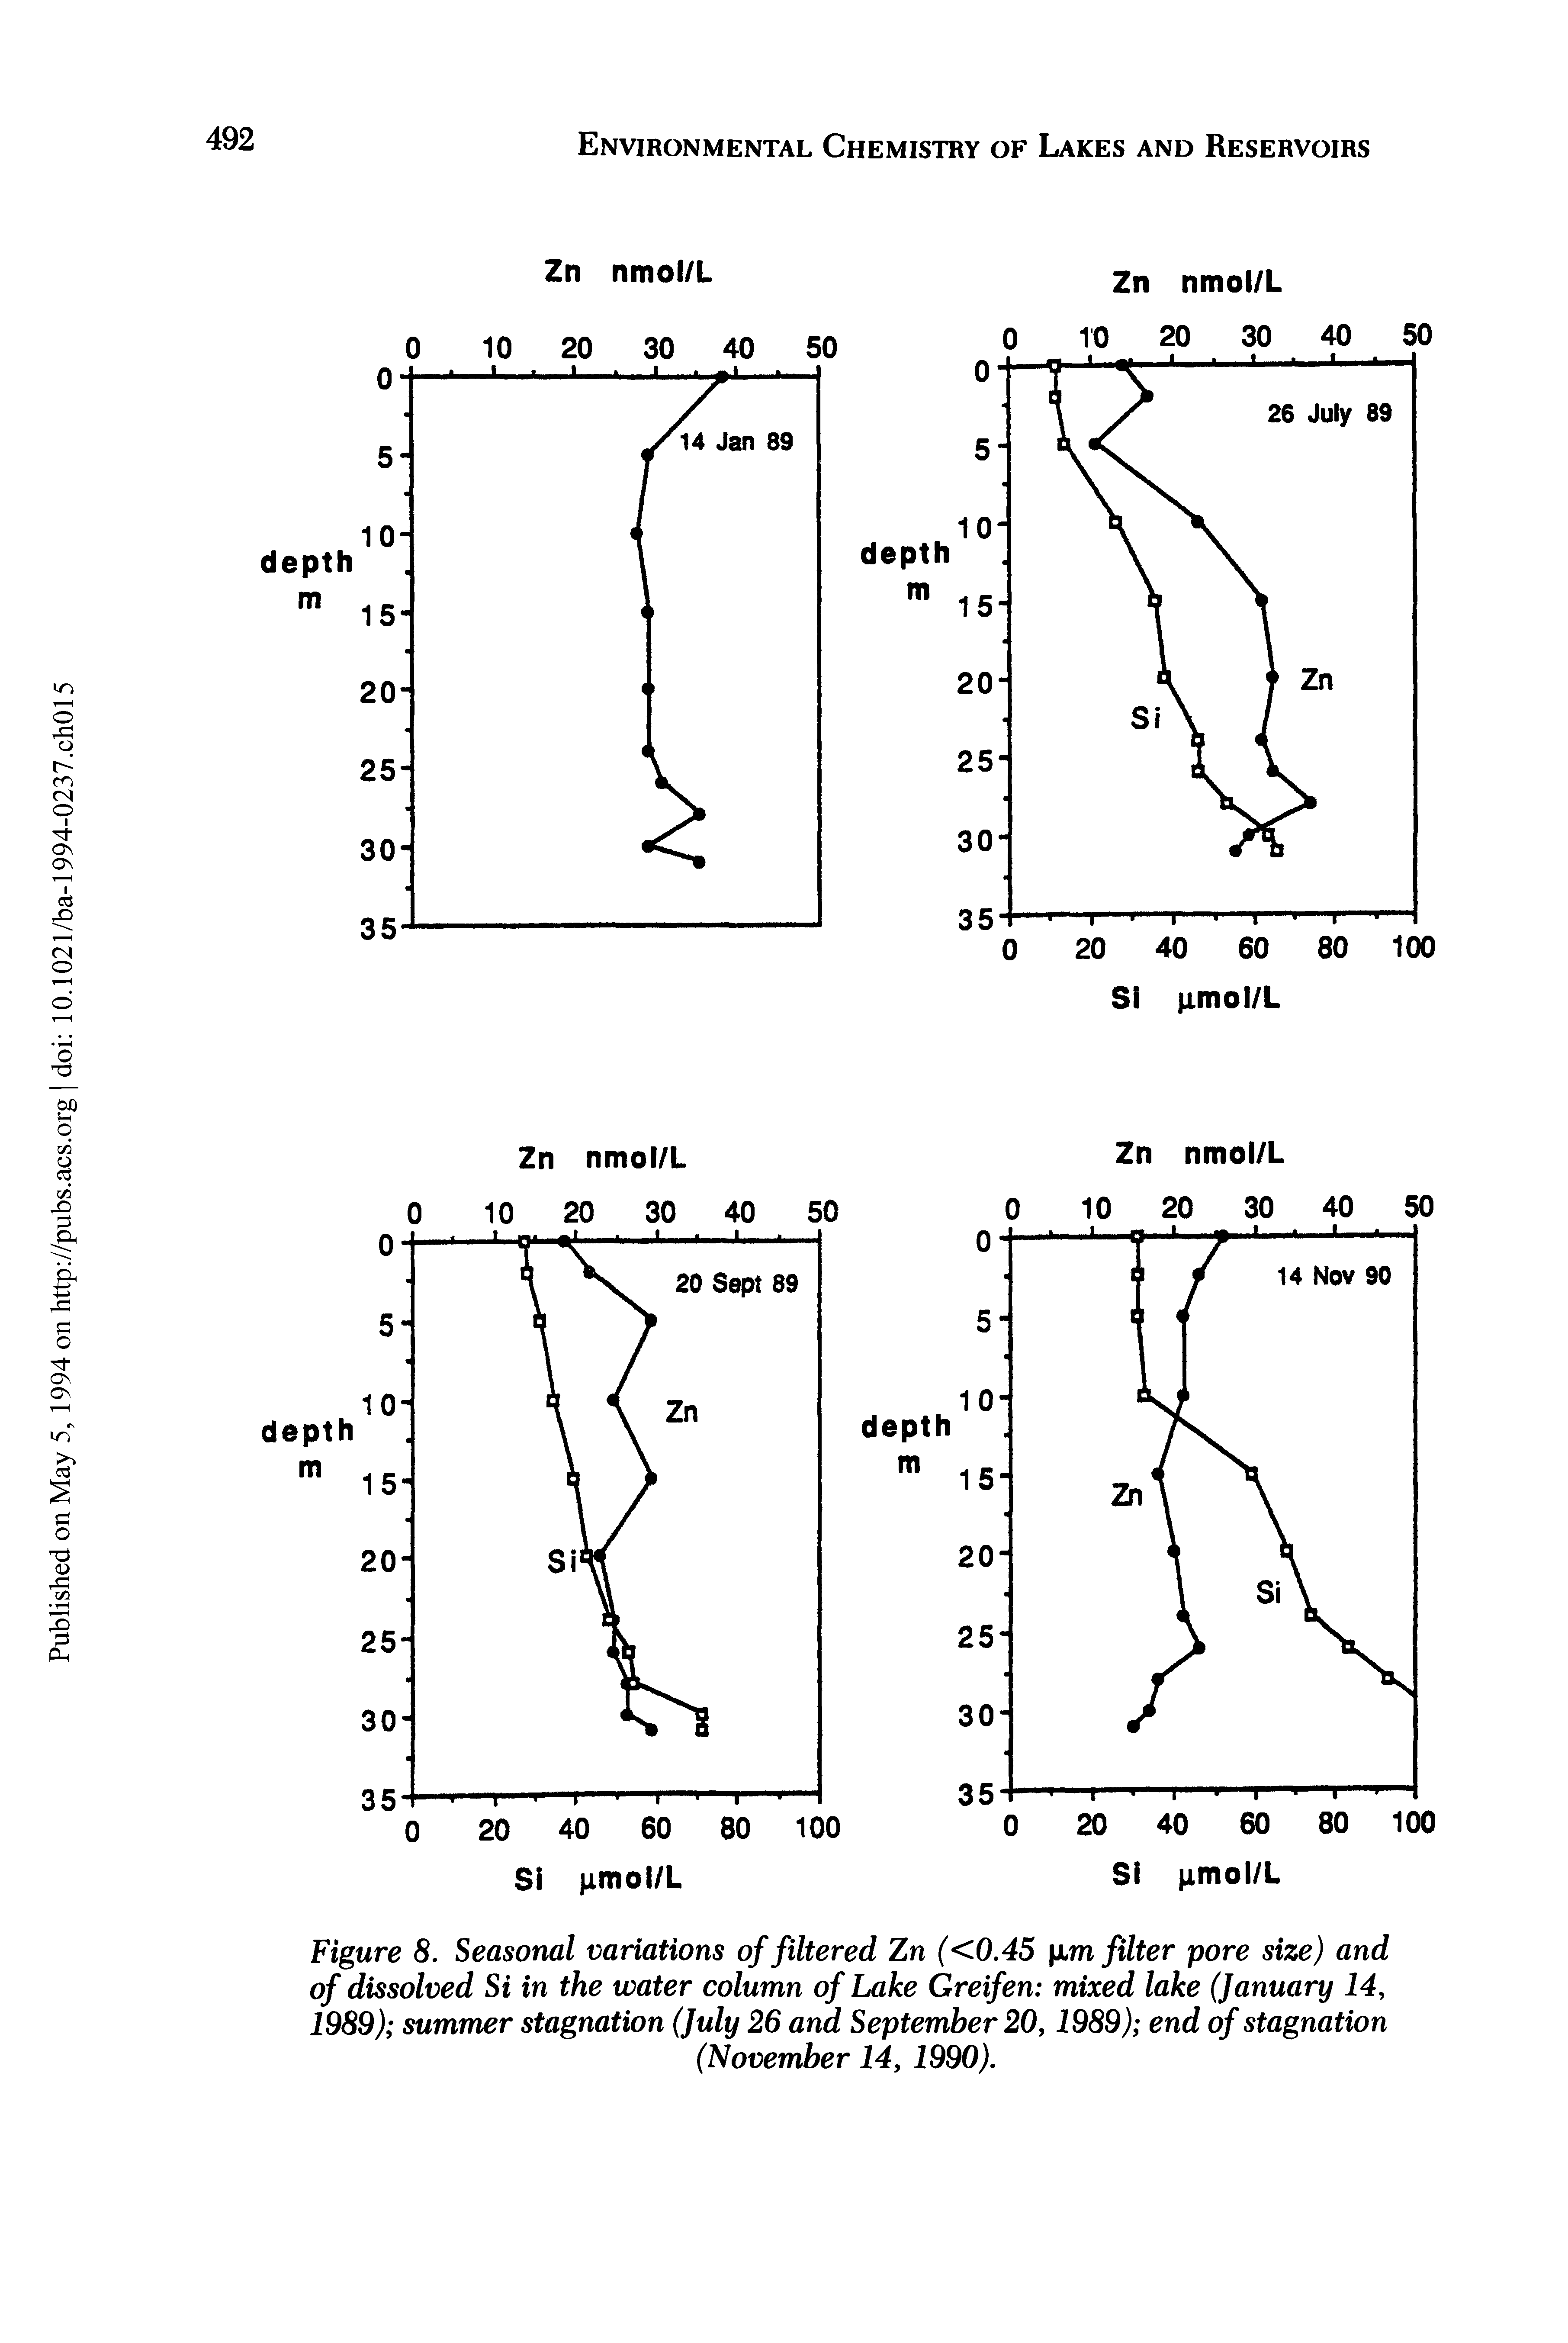 Figure 8. Seasonal variations of filtered Zn (<0.45 xm filter pore size) and of dissolved Si in the water column of Lake Greifen mixed lake (January 14, 1989) summer stagnation (July 26 and September 20,1989) end of stagnation (November 14, 1990).